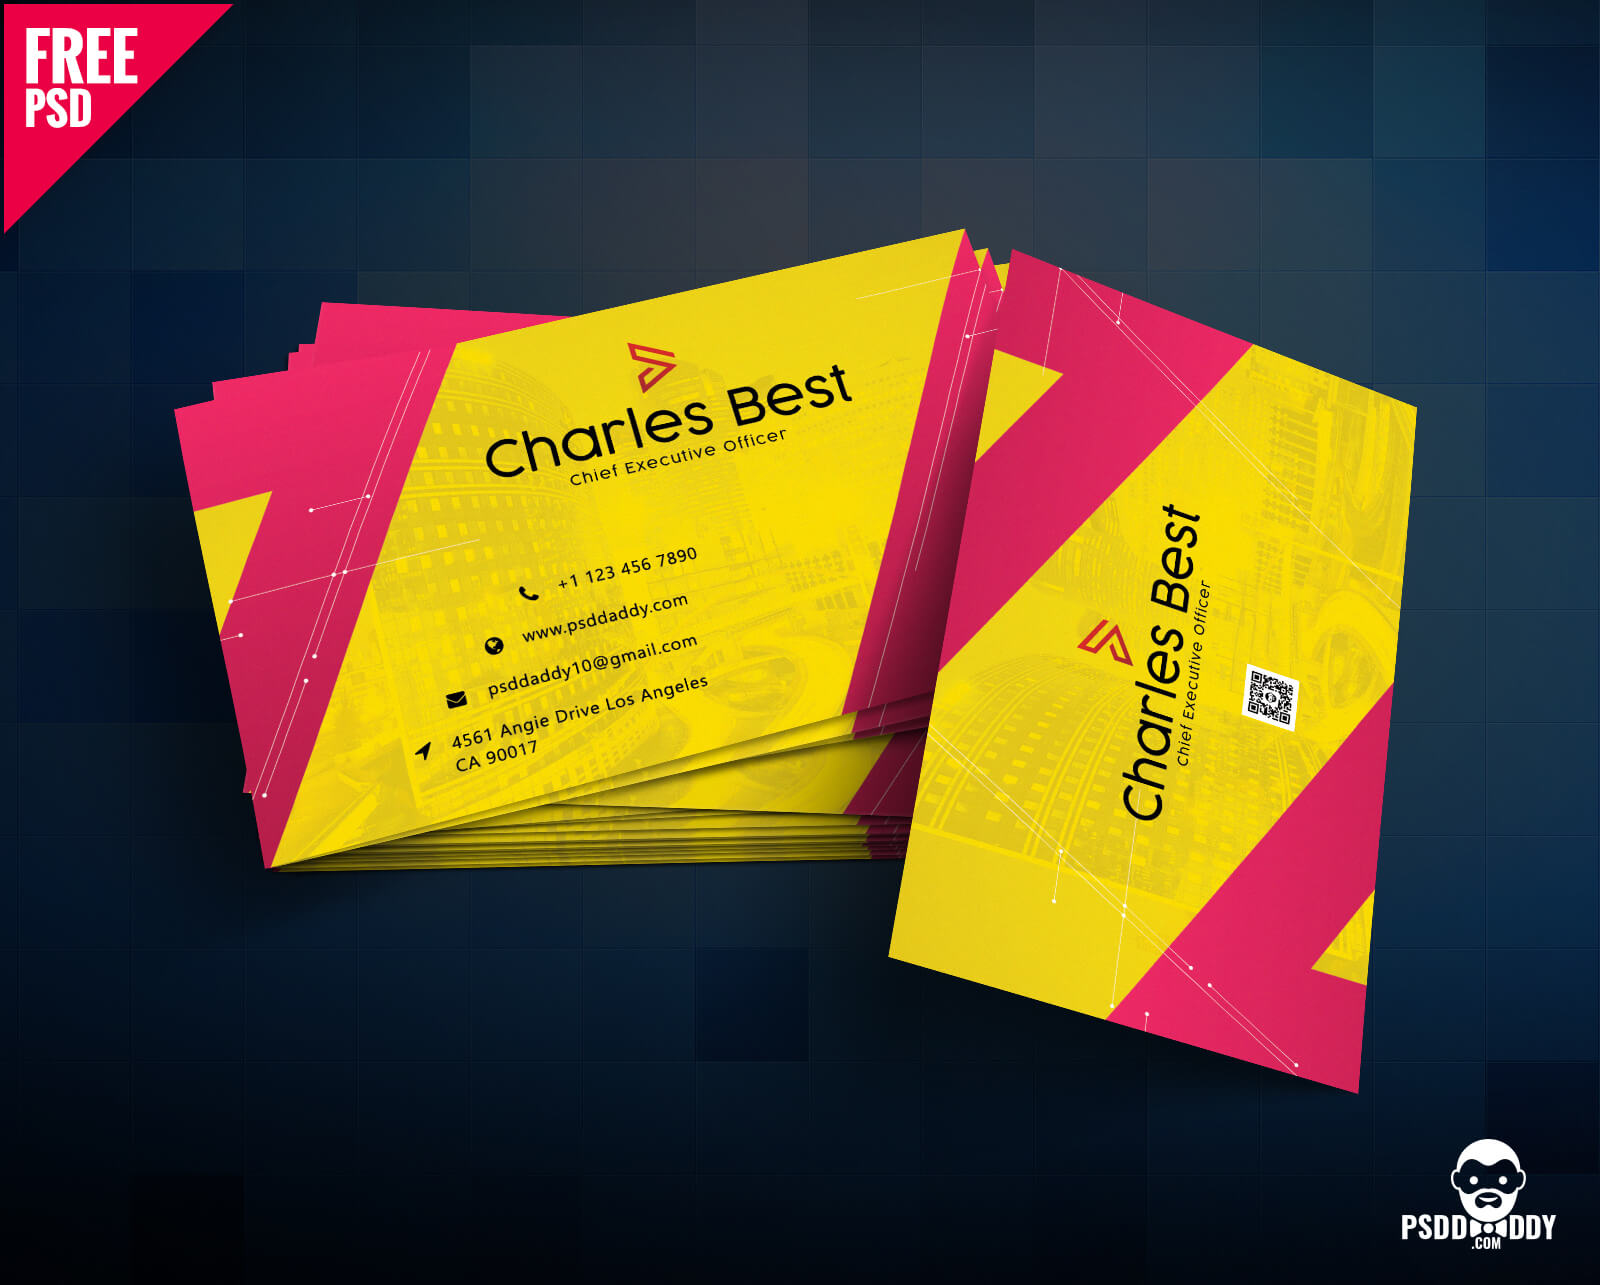 Download] Creative Business Card Free Psd | Psddaddy Pertaining To Creative Business Card Templates Psd